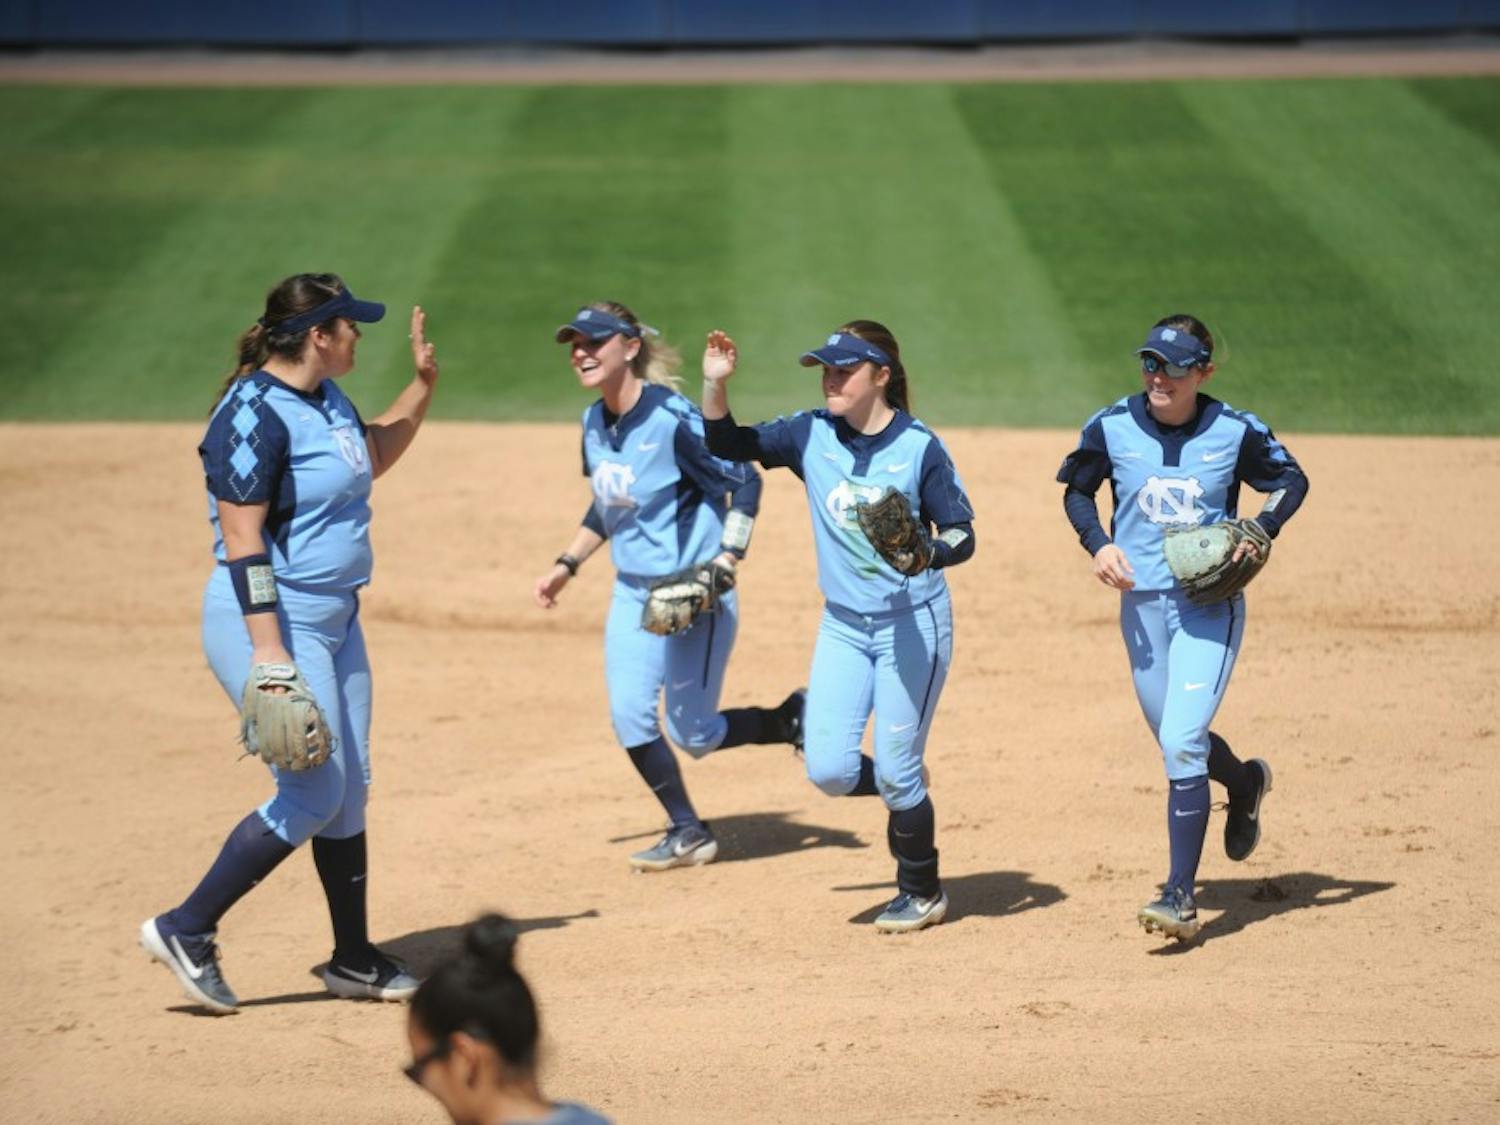 Players celebrate during UNC's Softball game vs. Georgia Tech on Sunday, Mar. 24. UNC lost the game 3-2.